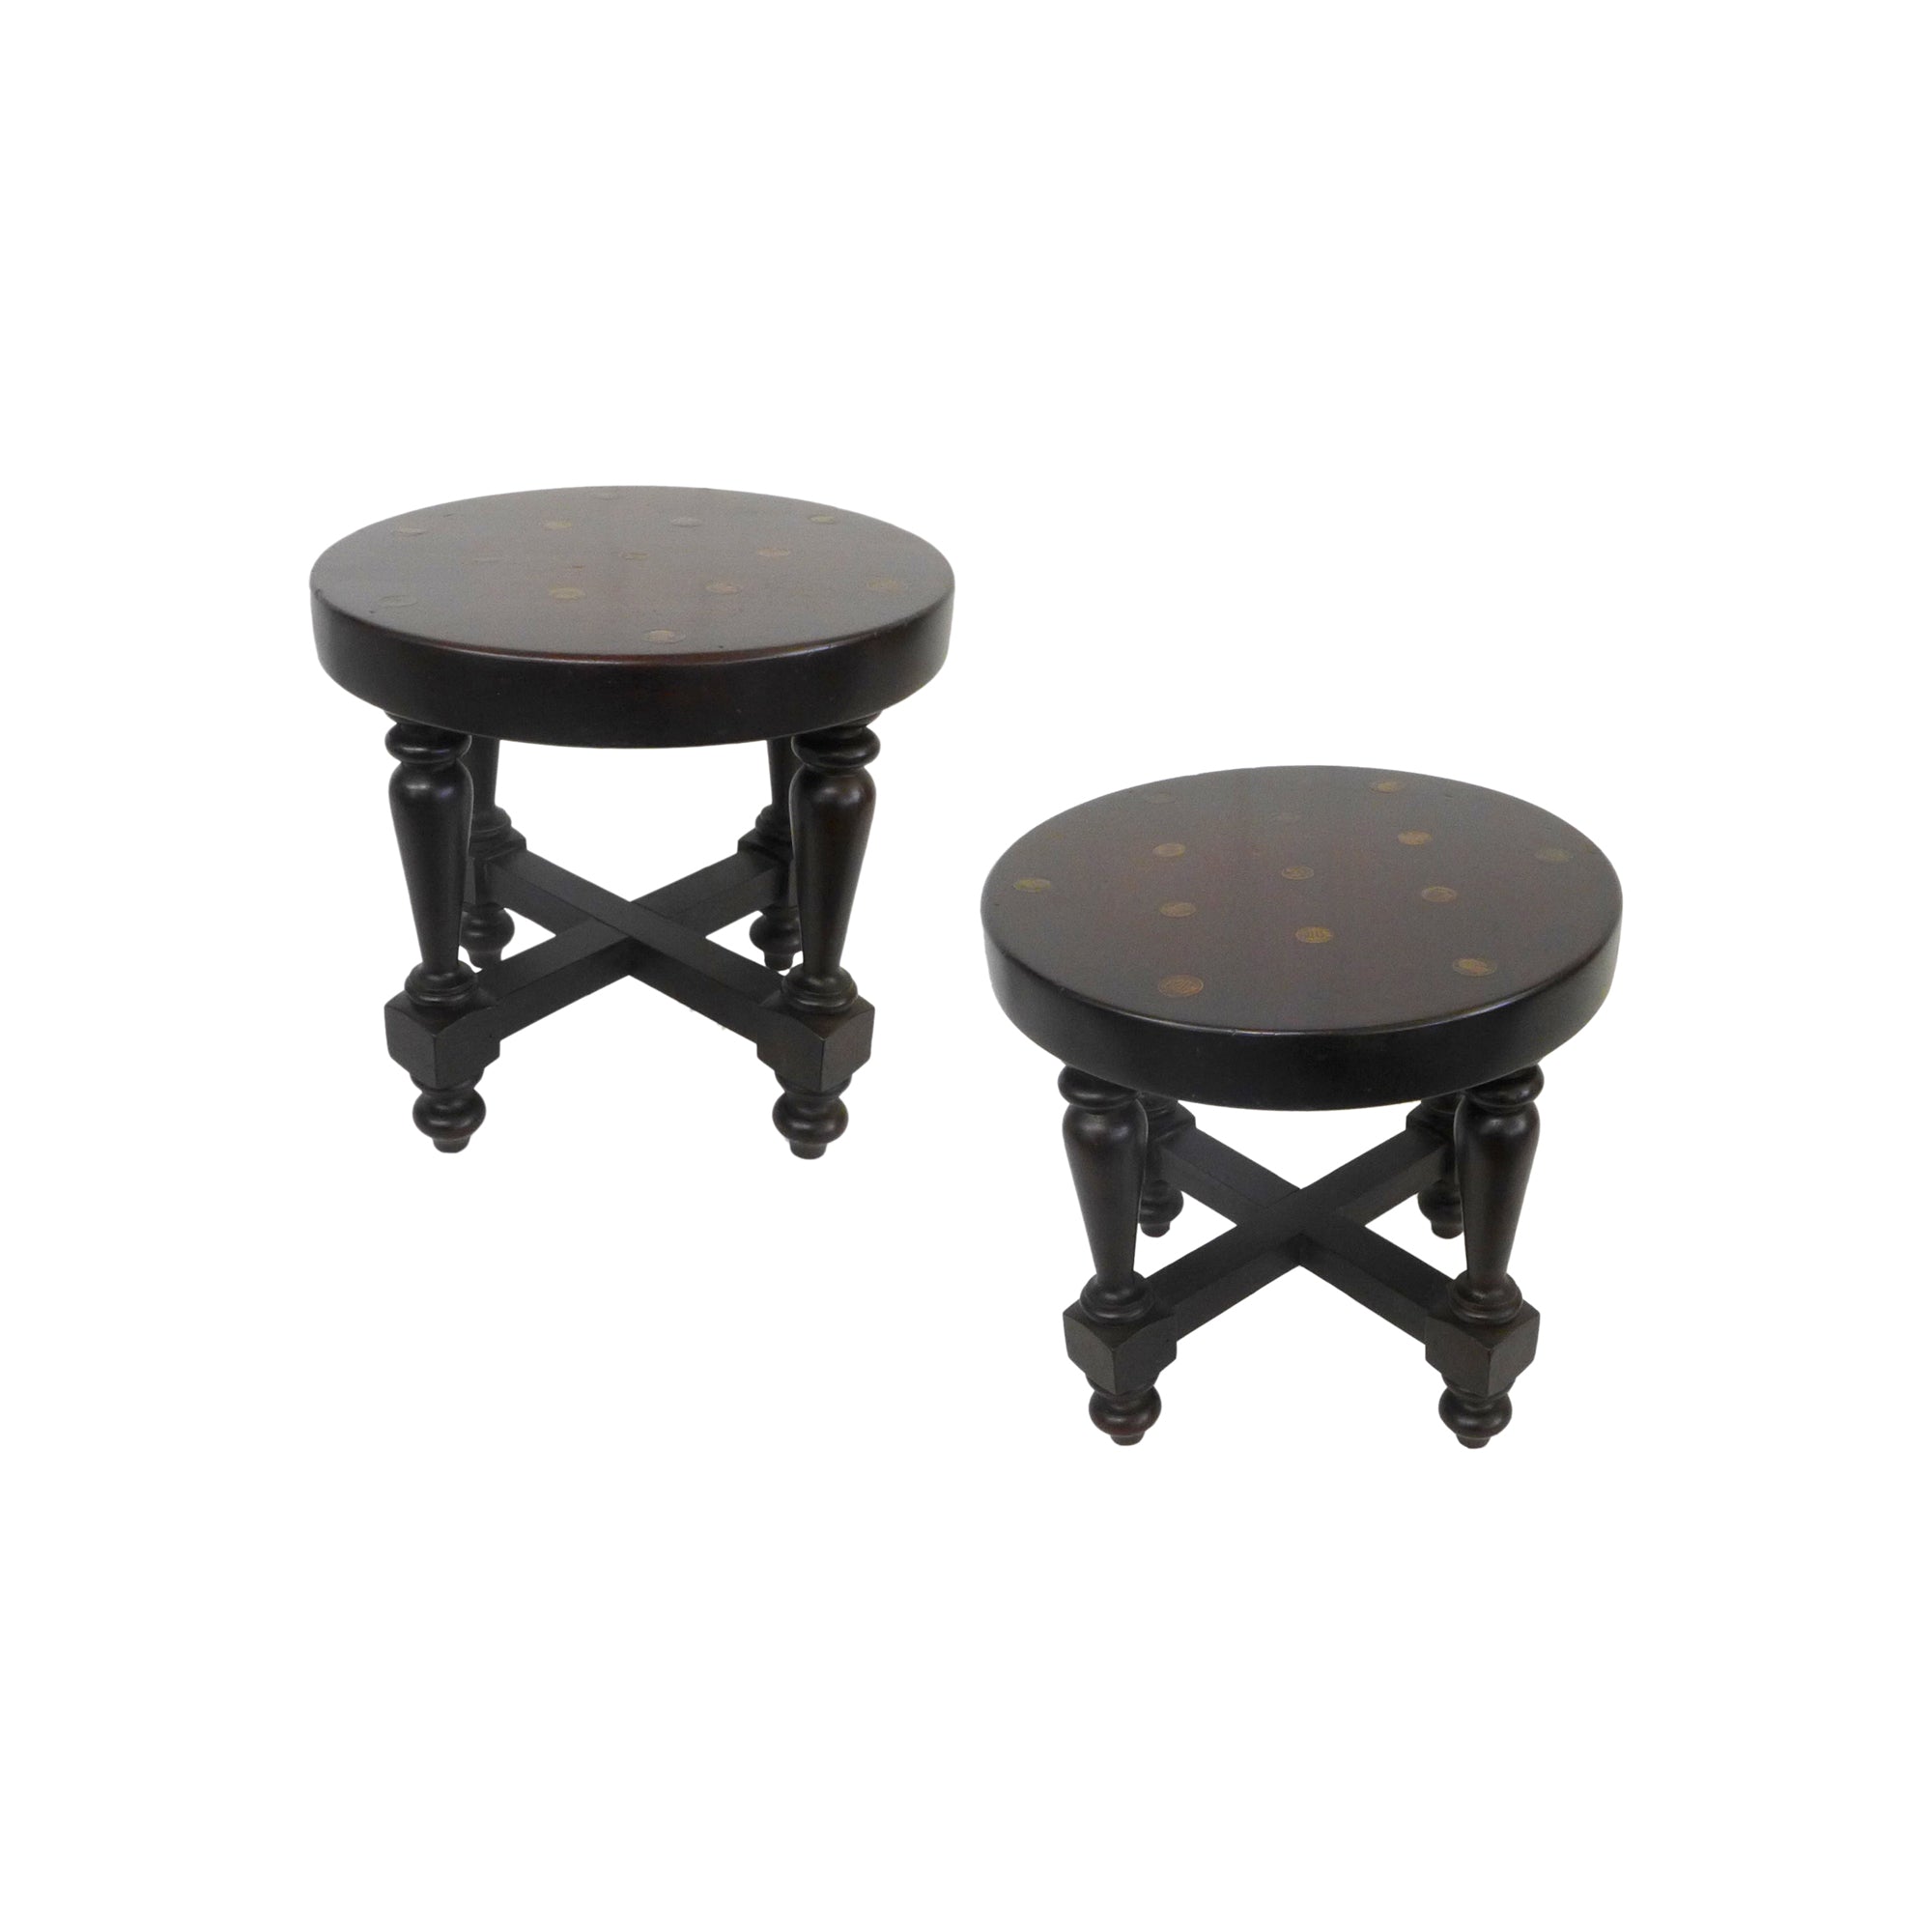 Pair of Low Turned Wood Stools or Side Tables with Inset Coins